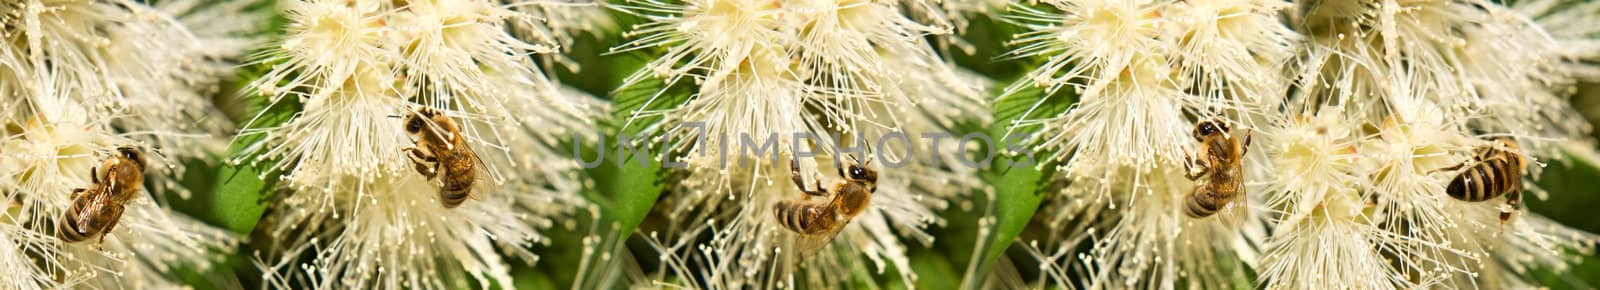 Spring Bees collecting pollen  on white syzygium flowers border